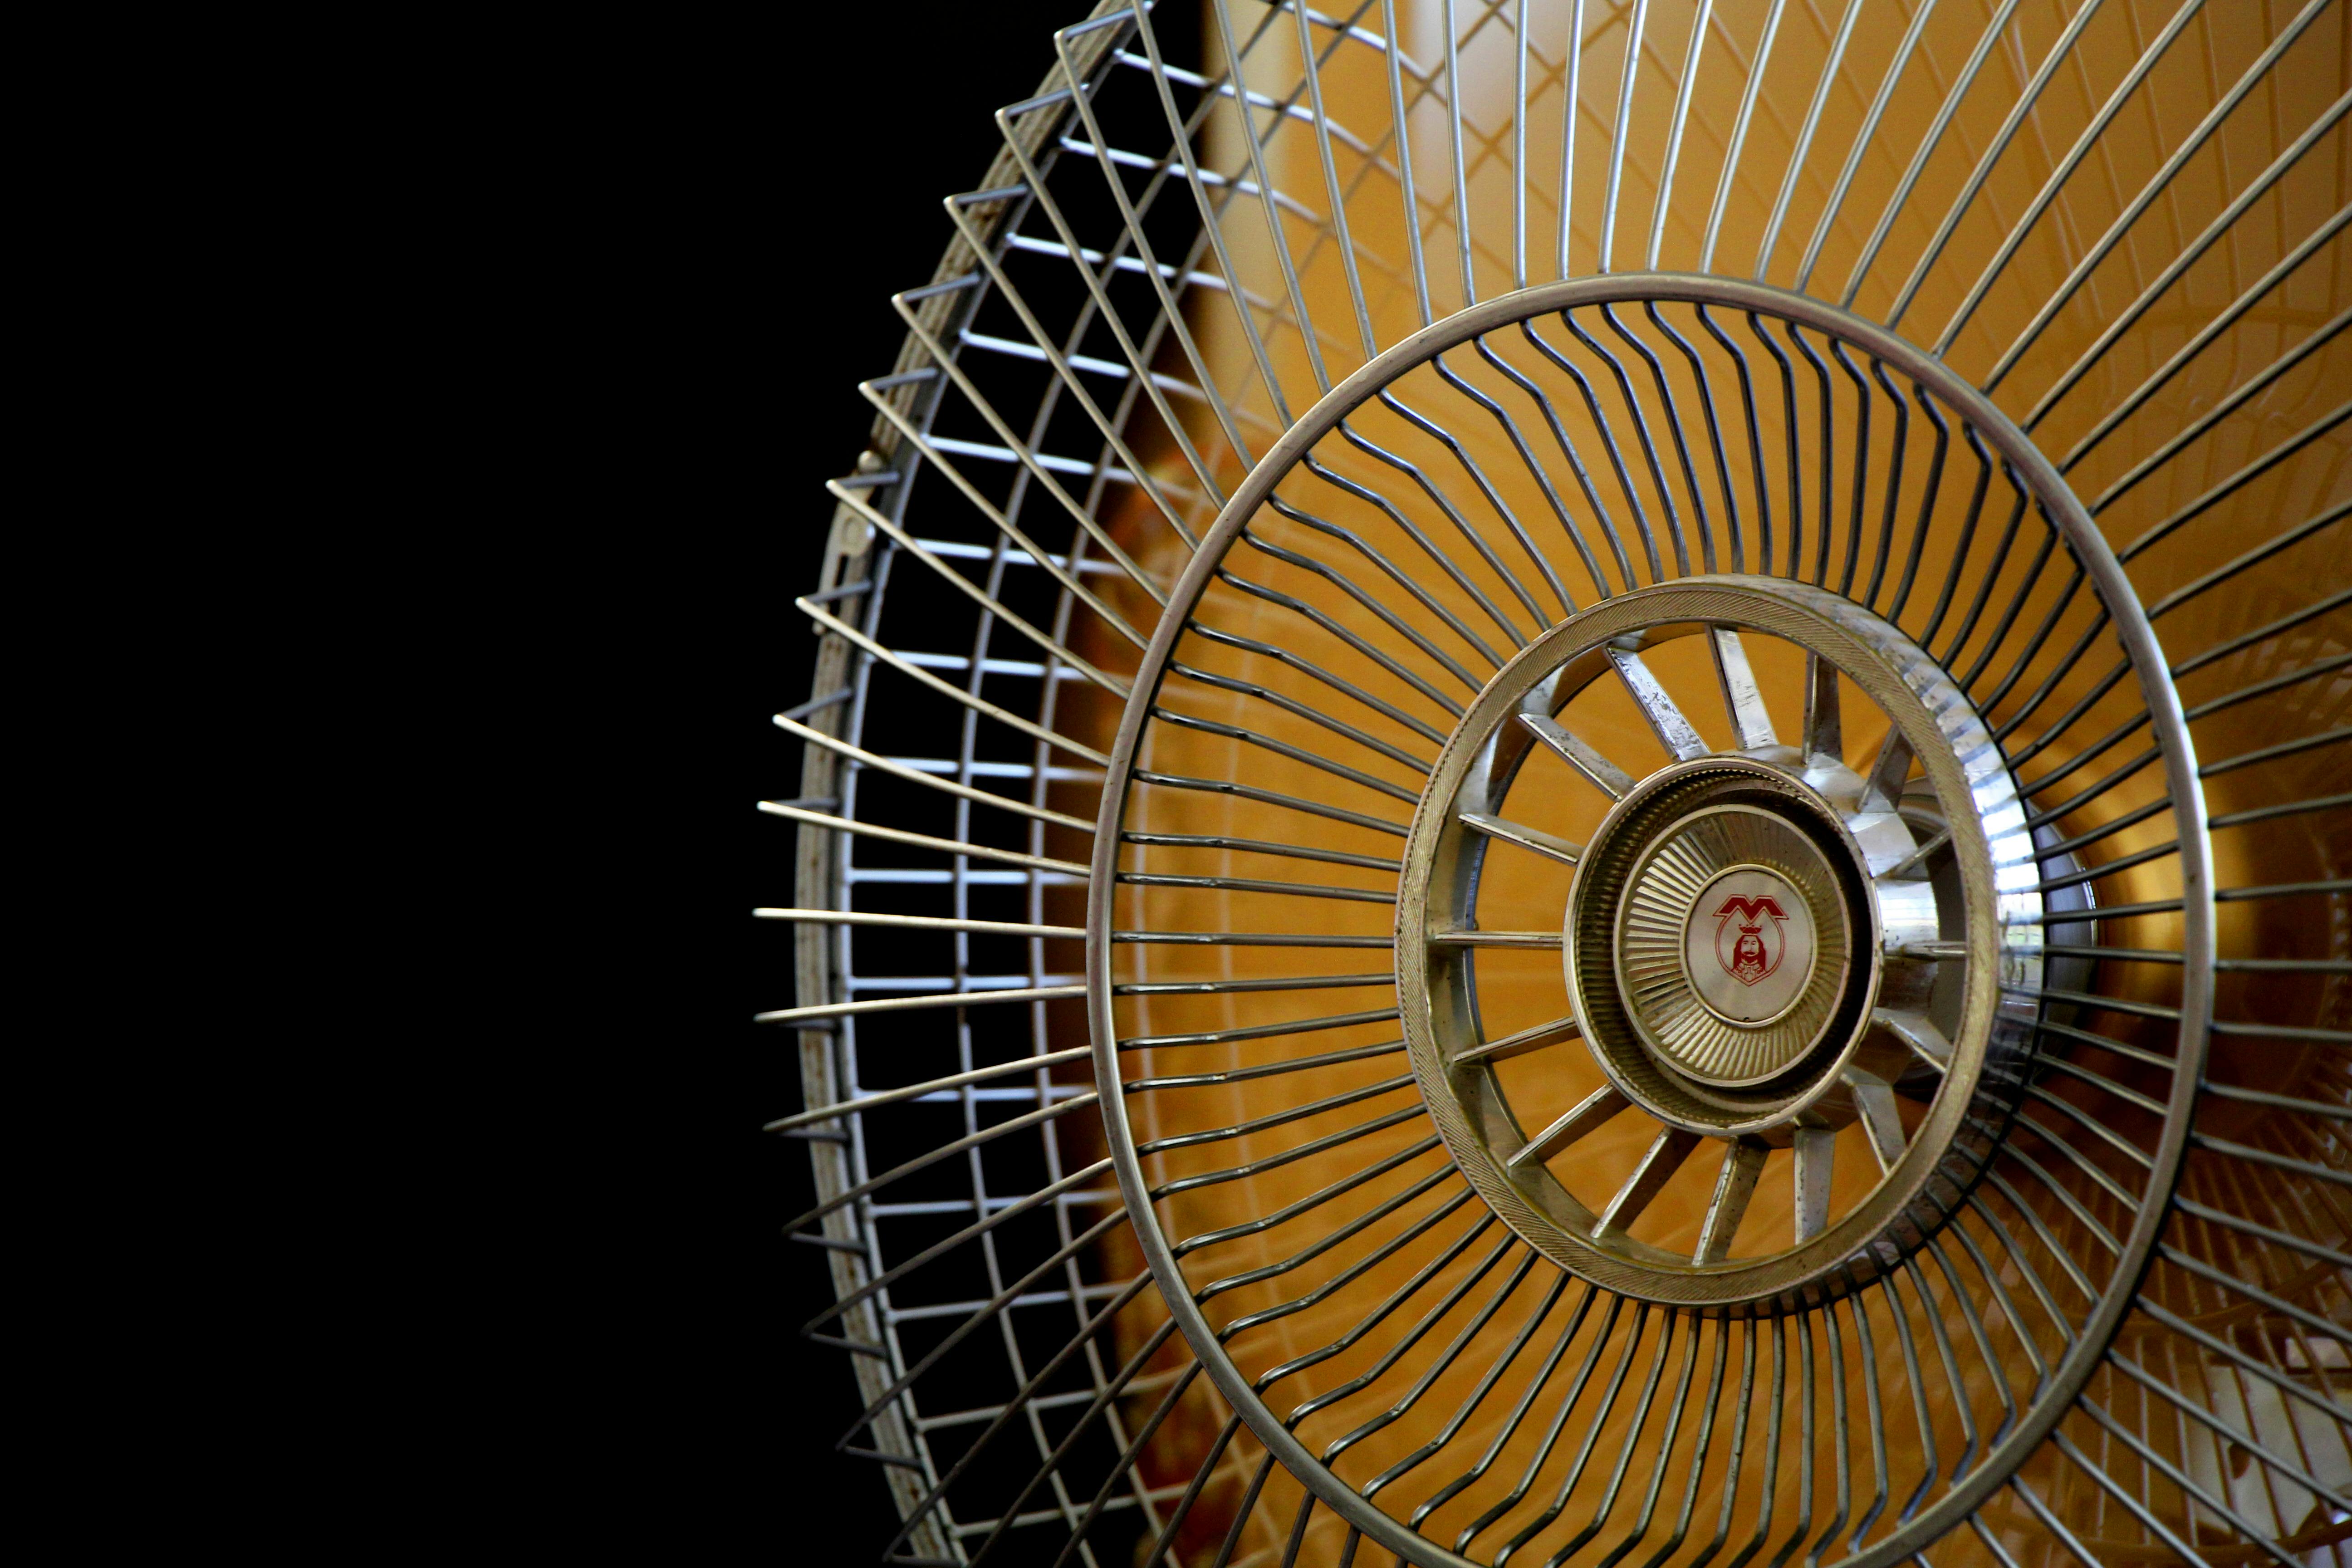 Stainless electric fan. | Photo: Pexels